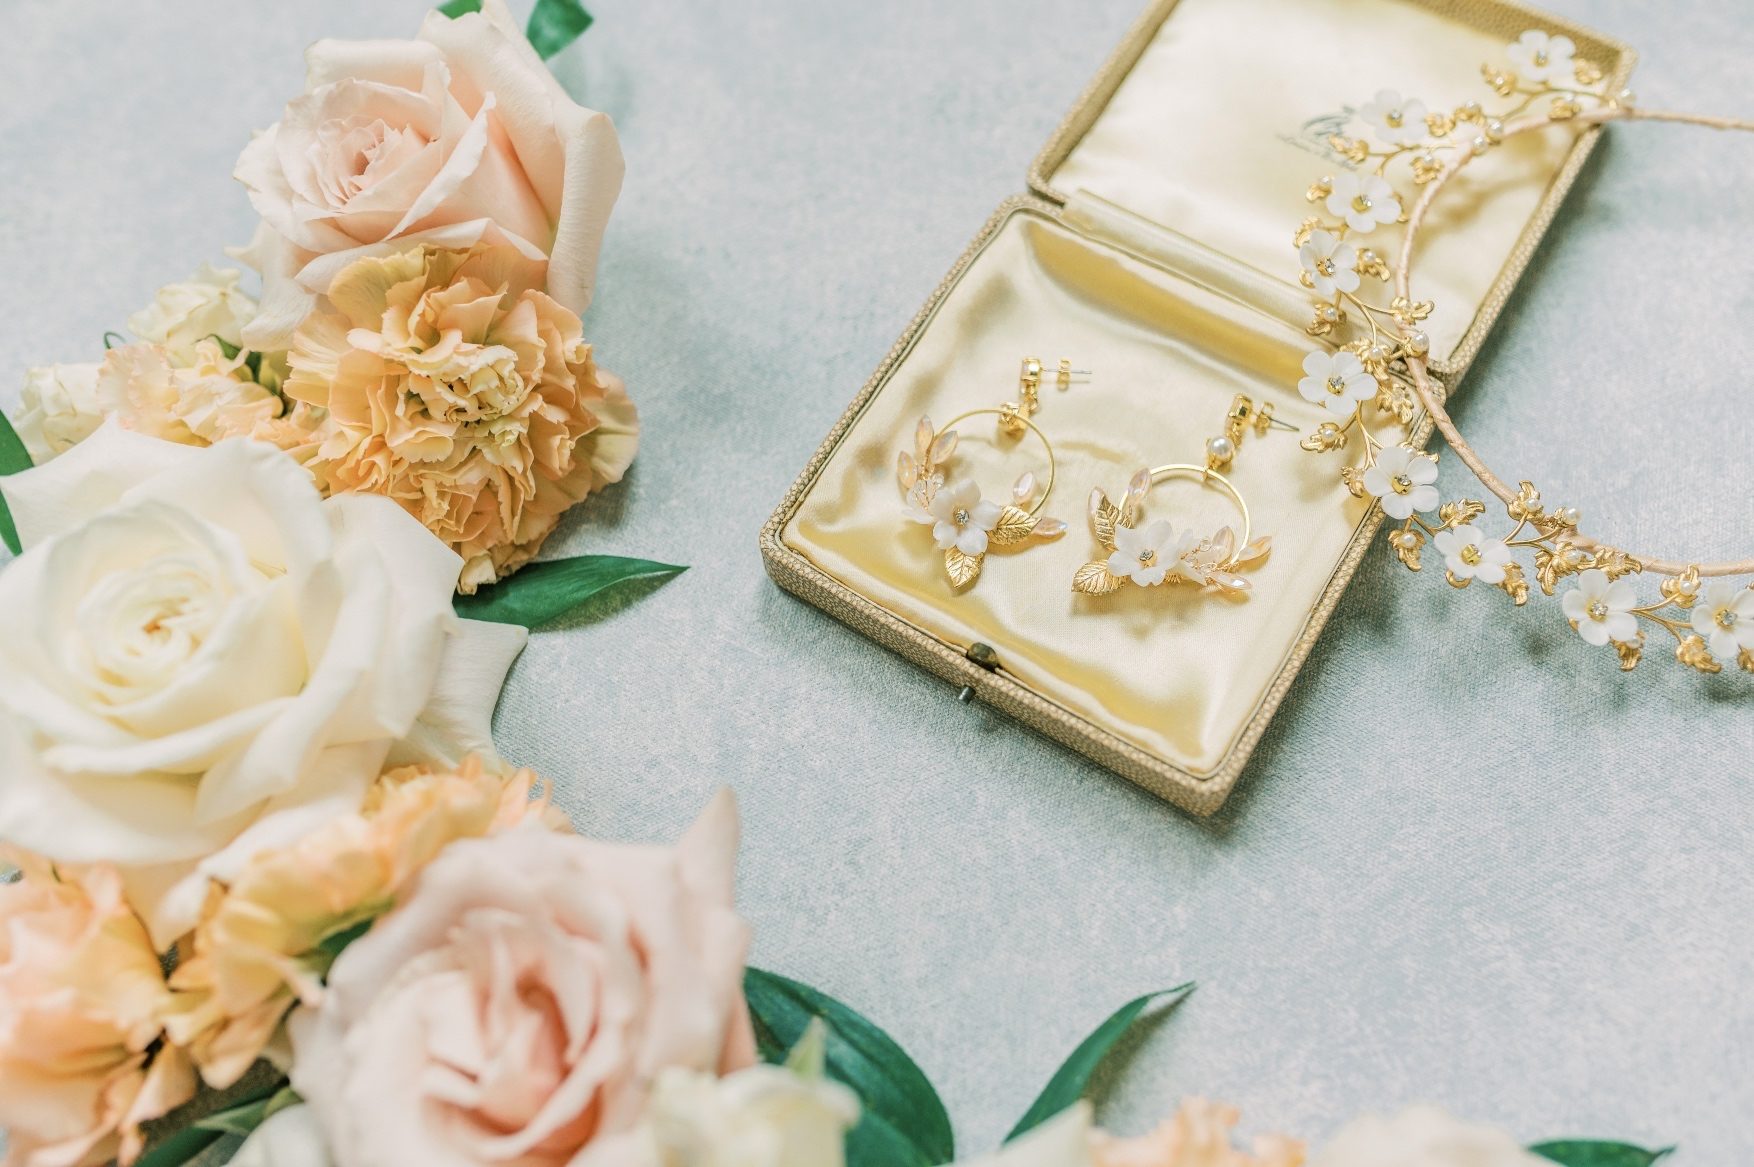 A close up of the earings in a decorative jewelry box with a mixture of peach and blush blooms nearby